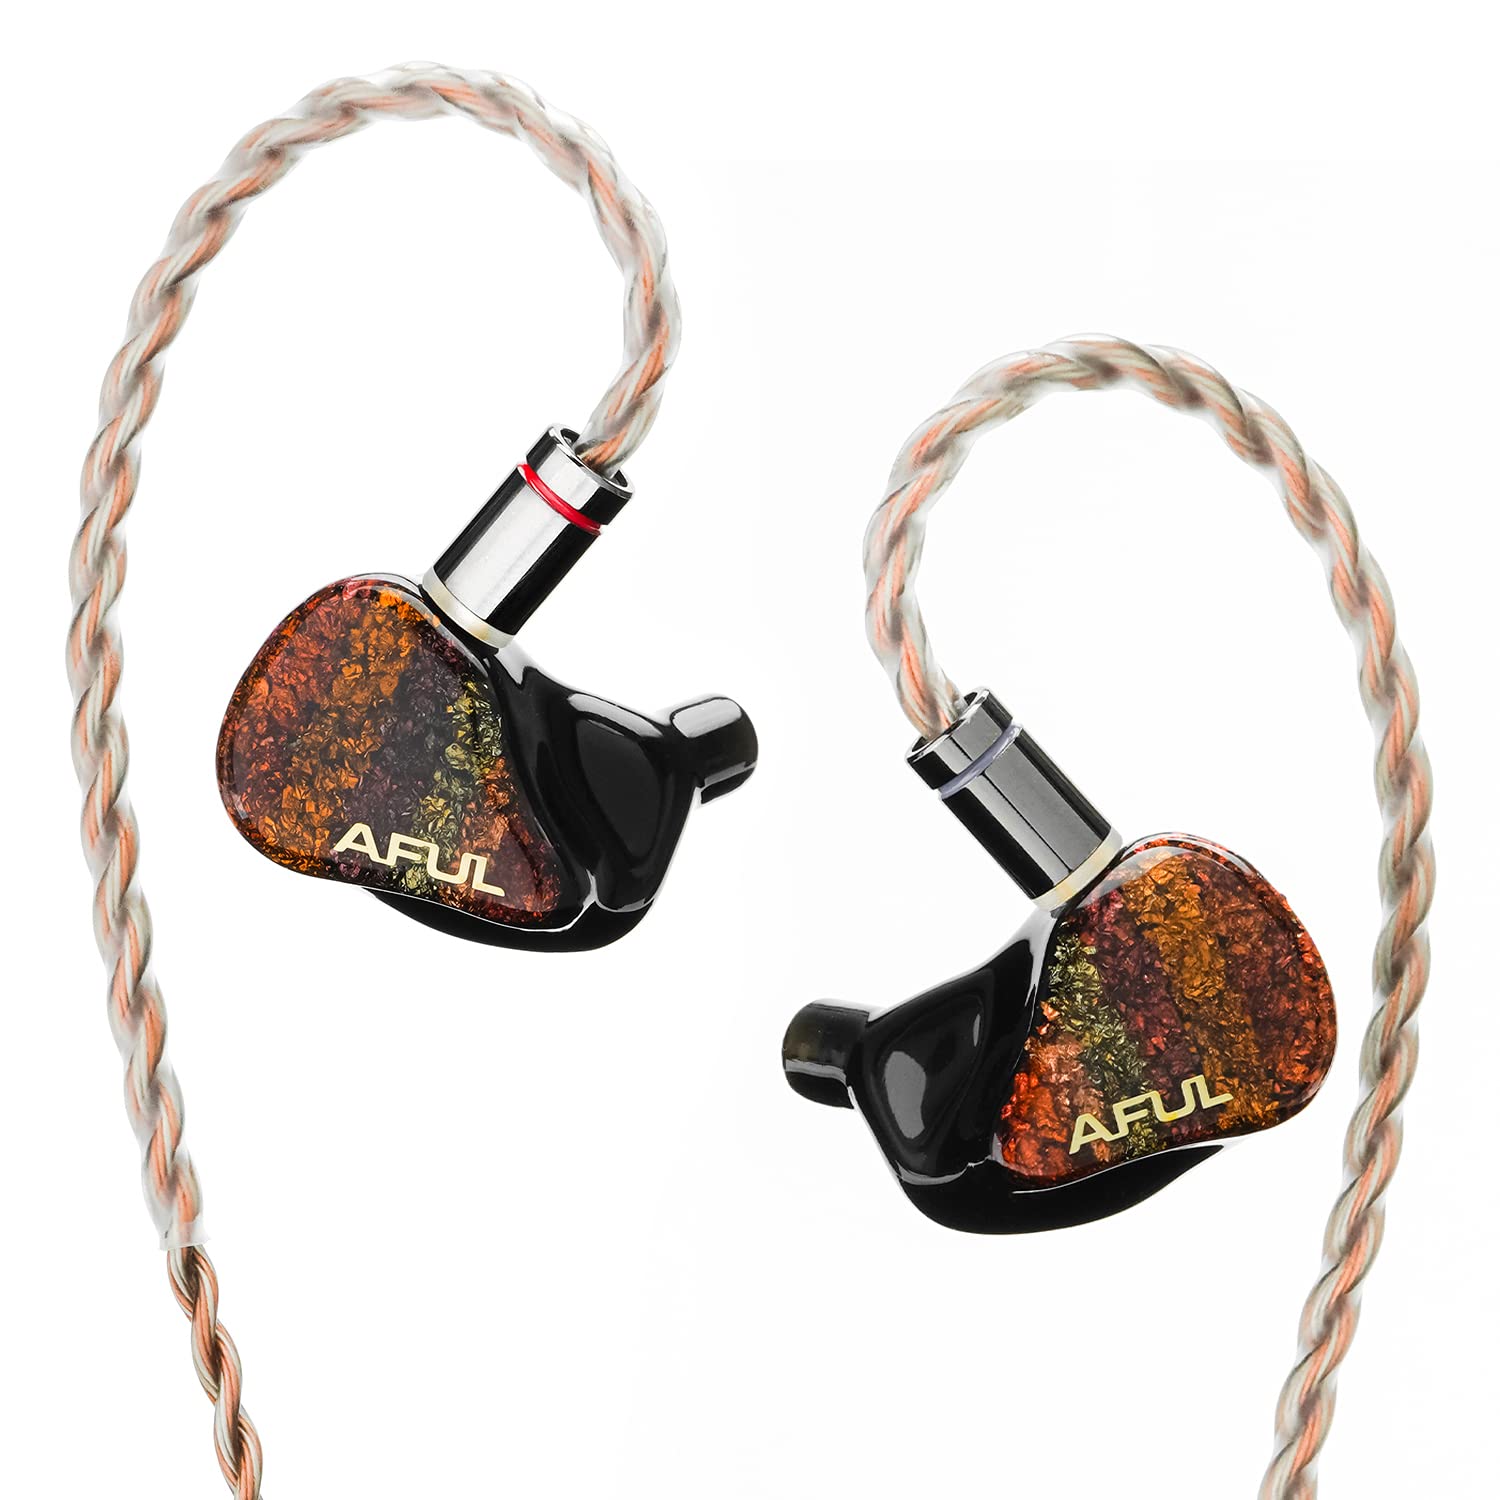 AFUL Acoustics Performer 8/Performer8 1DD+ 7BA Driver in-Ear Monitors, Masterpieces Hybrid Drivers IEMs in-Ear Earphones with Easy Driveability (Performer 8)